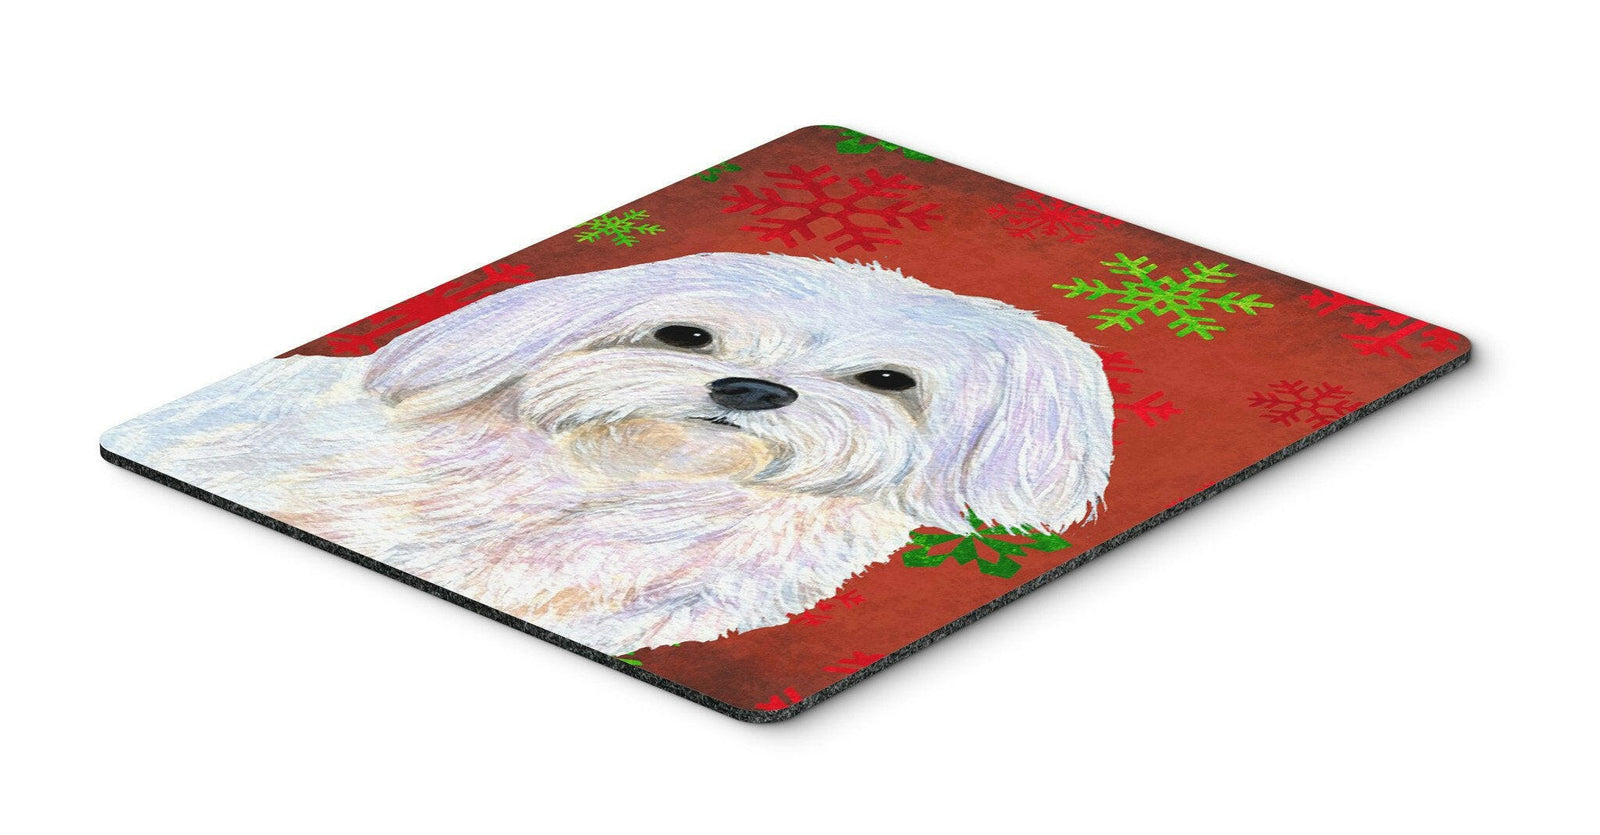 Maltese Red and Green Snowflakes Holiday Christmas Mouse Pad, Hot Pad or Trivet by Caroline's Treasures